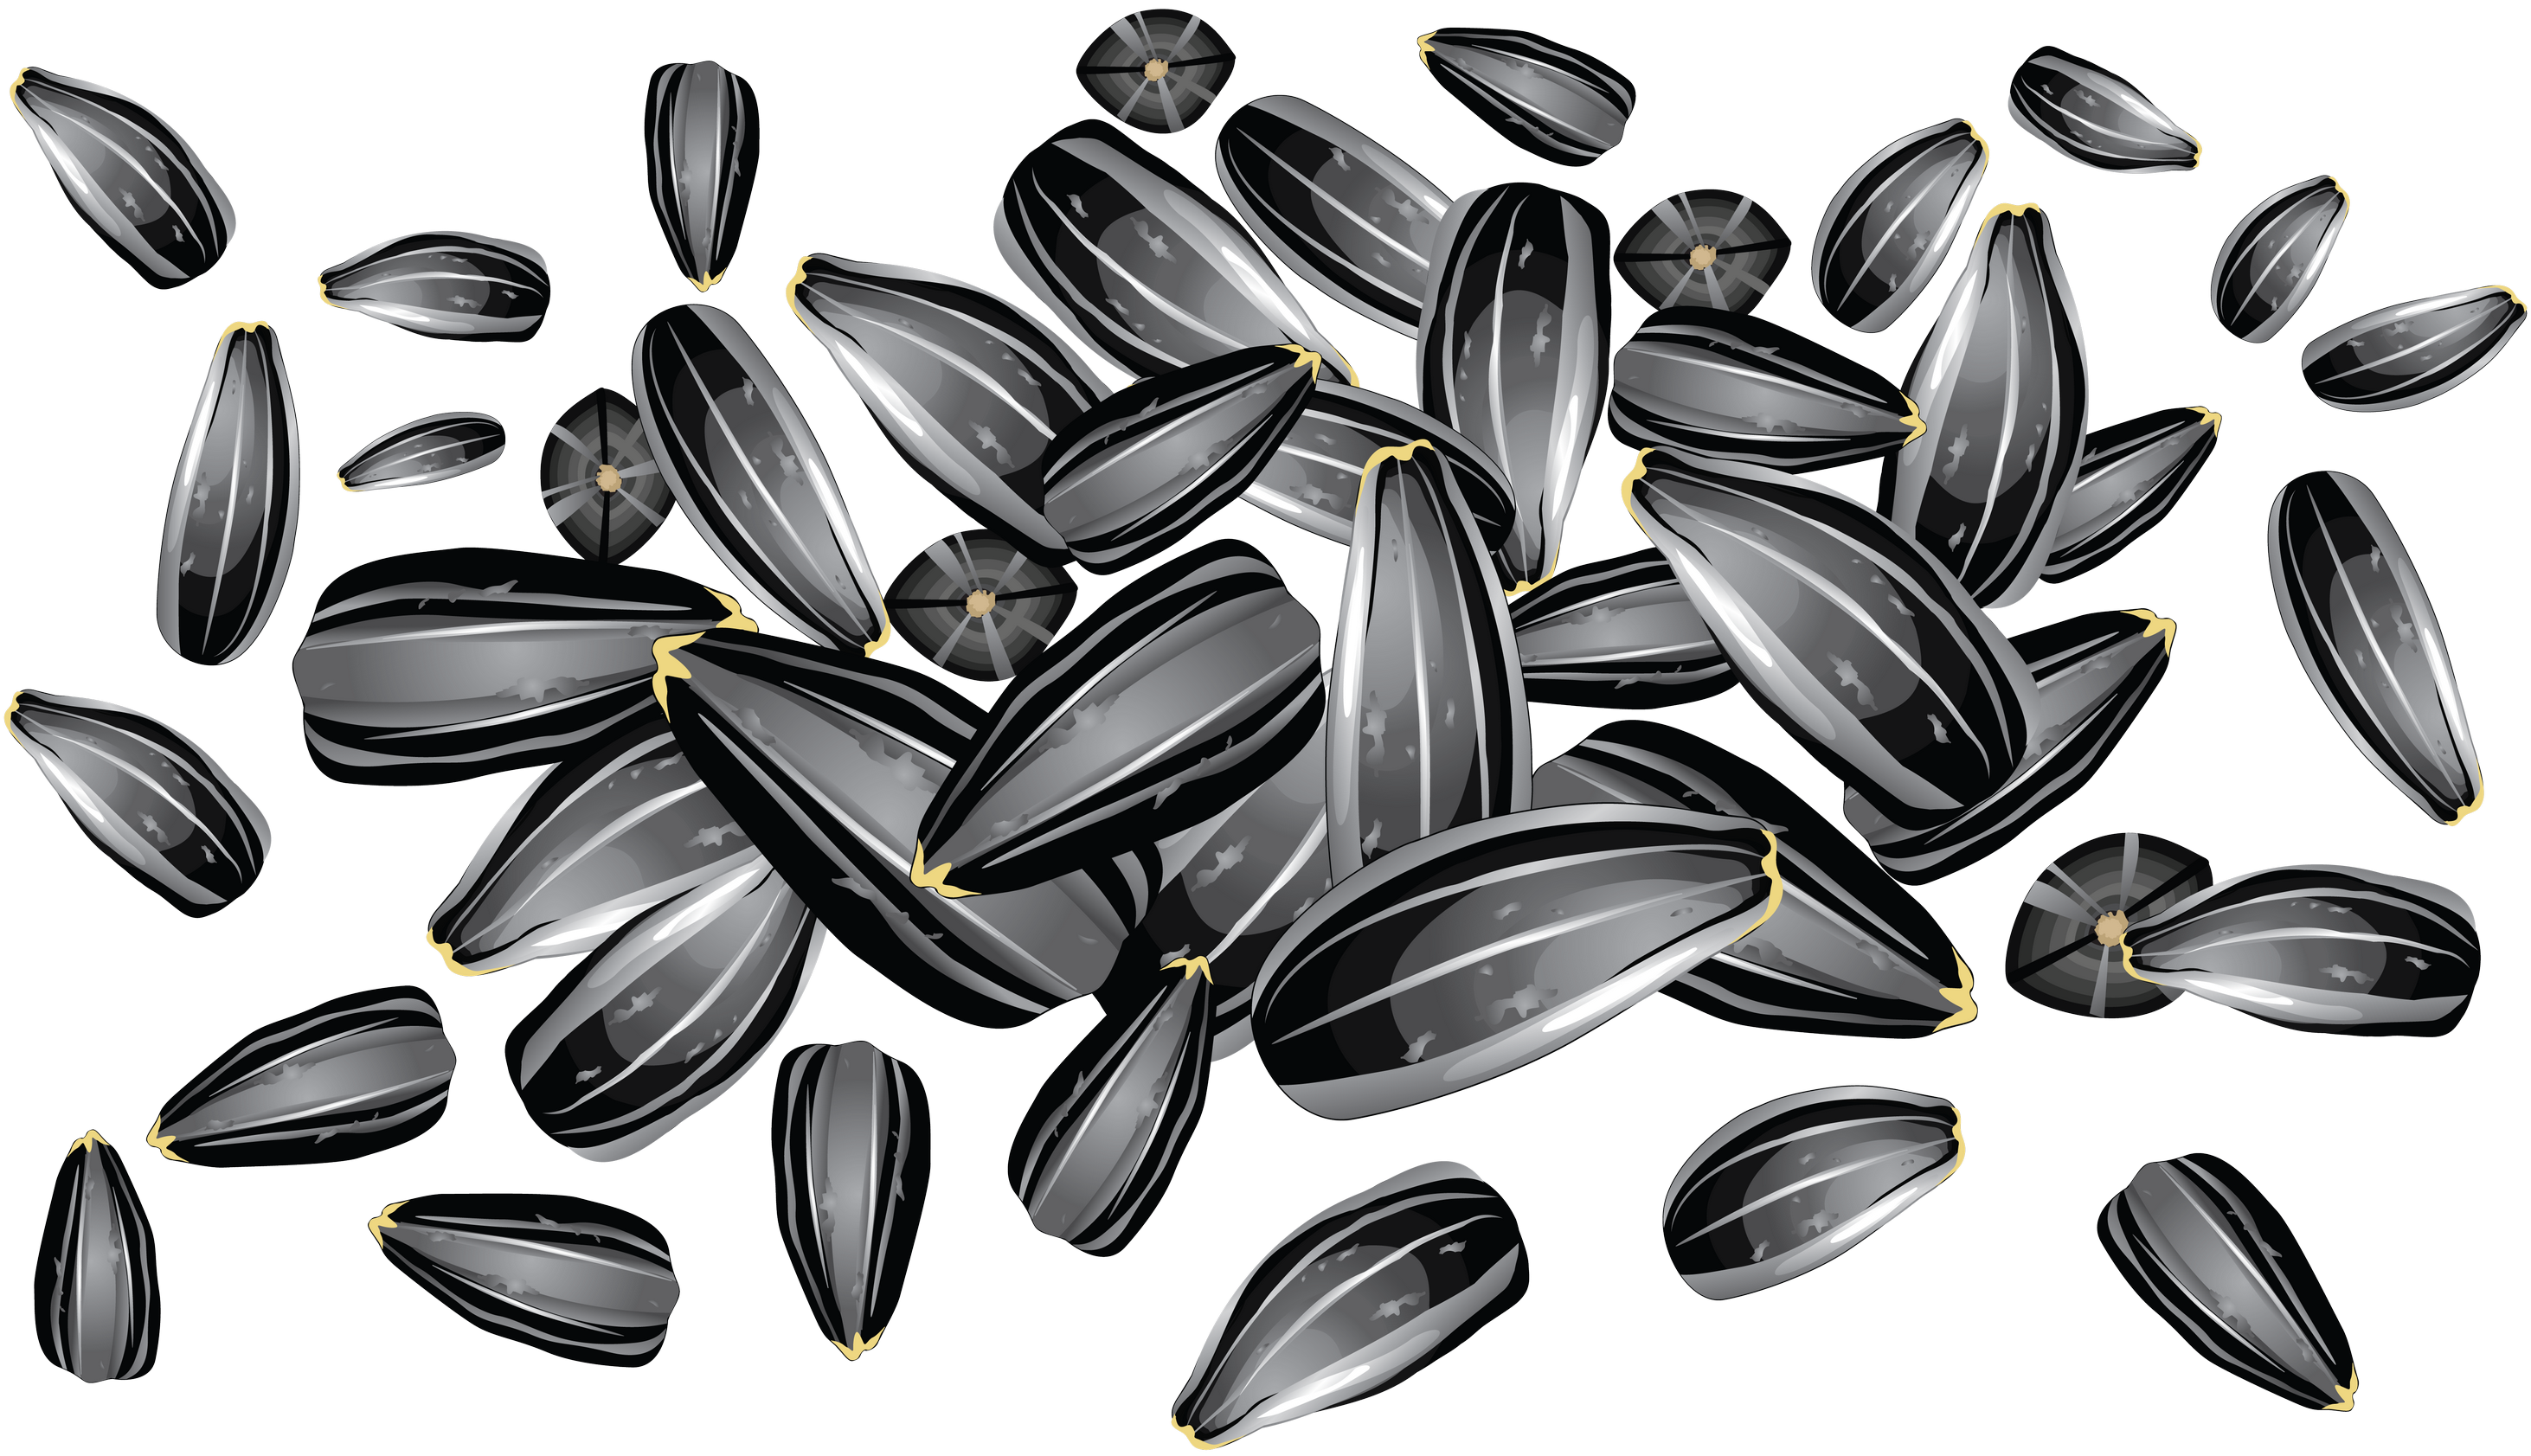 Sunflower Seeds PNG Image for Free Download